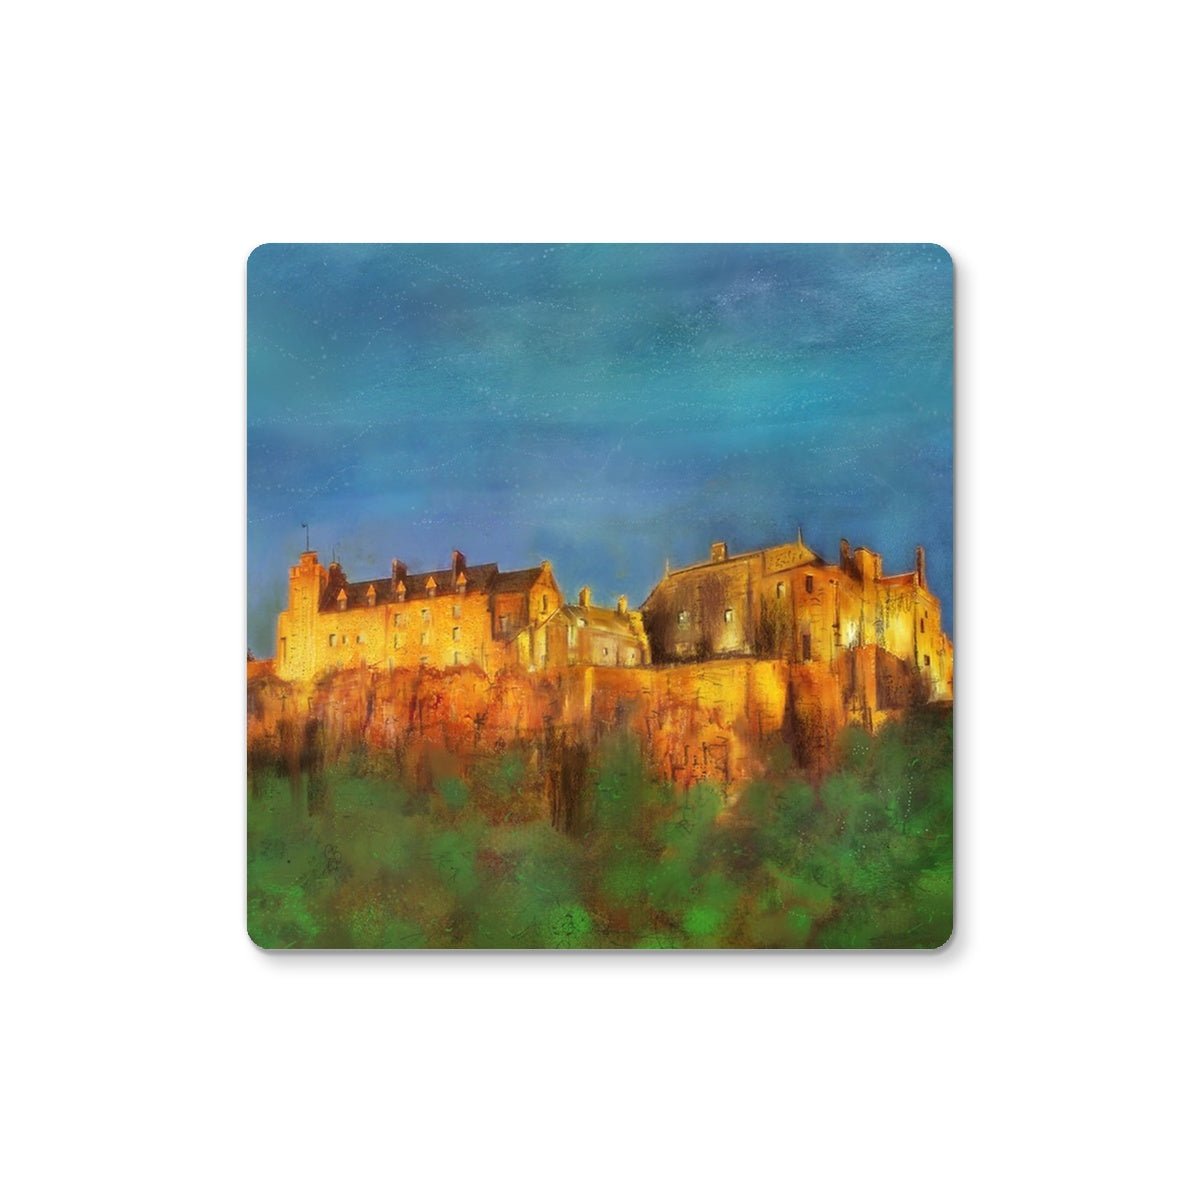 Stirling Castle Art Gifts Coaster-Coasters-Historic & Iconic Scotland Art Gallery-Single Coaster-Paintings, Prints, Homeware, Art Gifts From Scotland By Scottish Artist Kevin Hunter